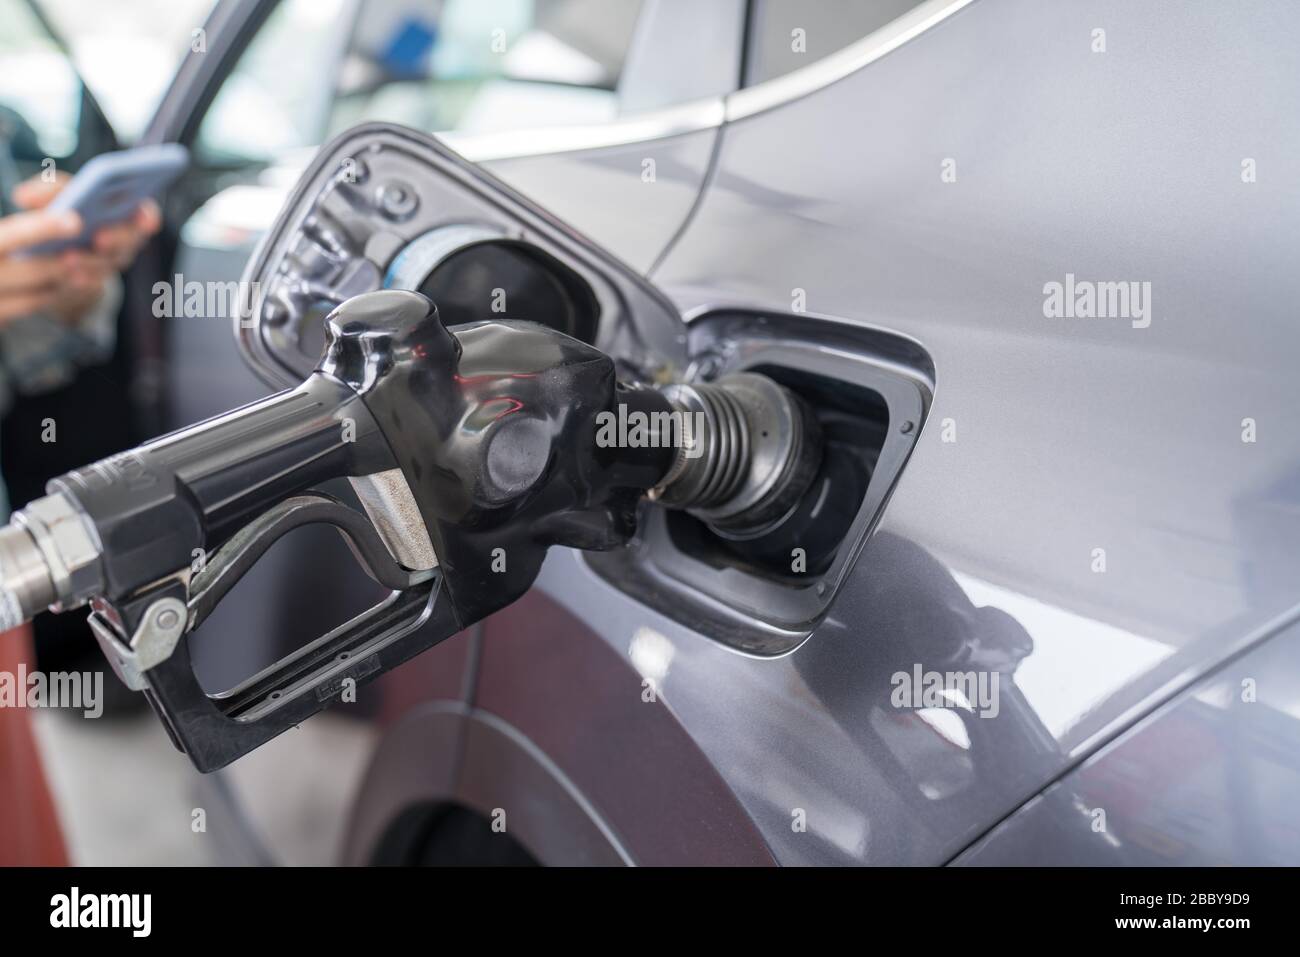 Fuel nozzle refueling a automobile car with woman using phone waiting Stock Photo